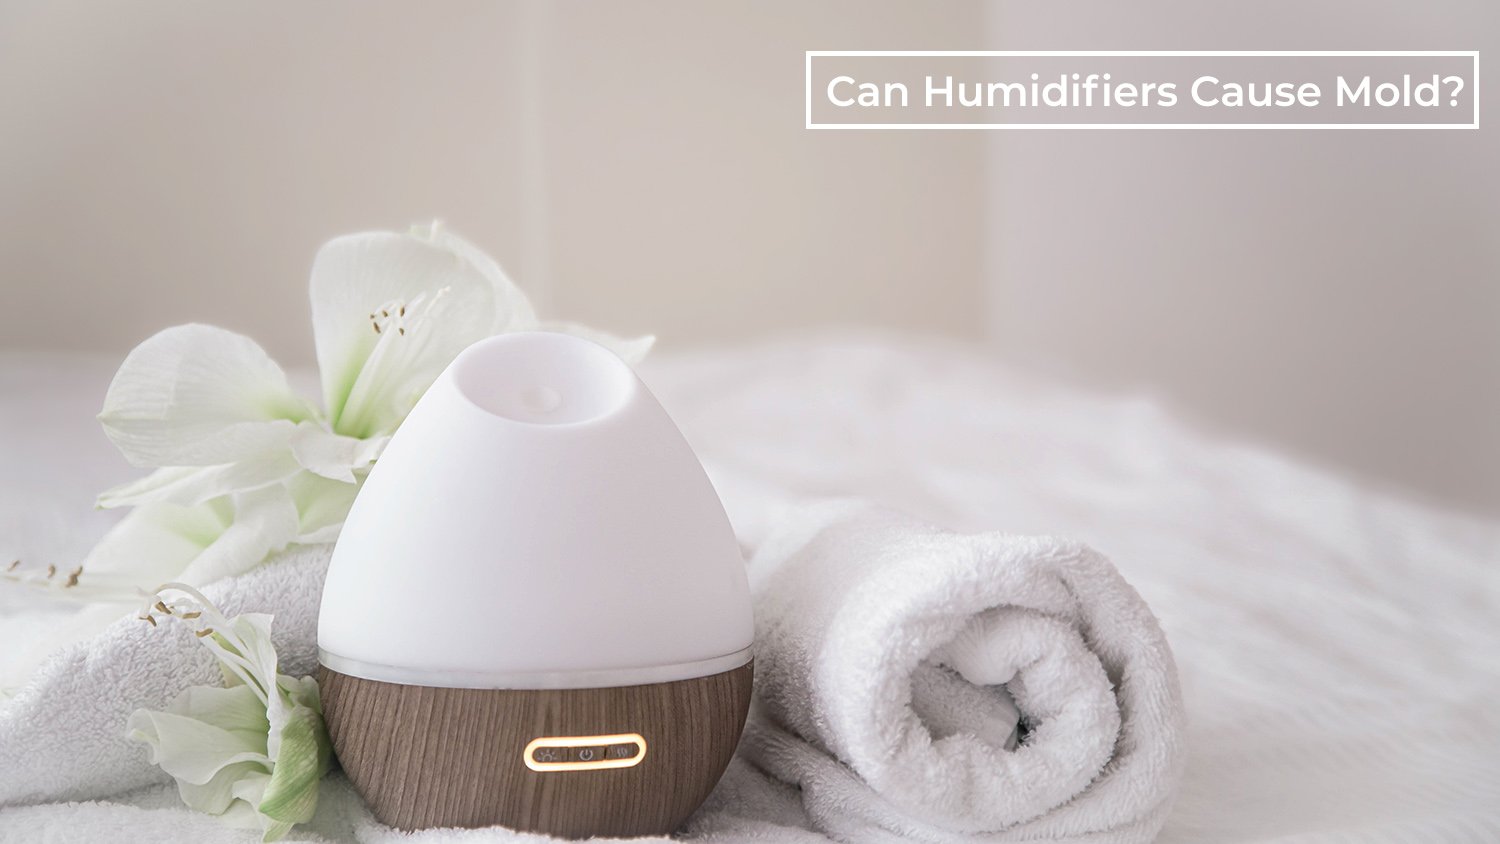 Can Humidifiers Cause Mold? Separating Fact from Fiction